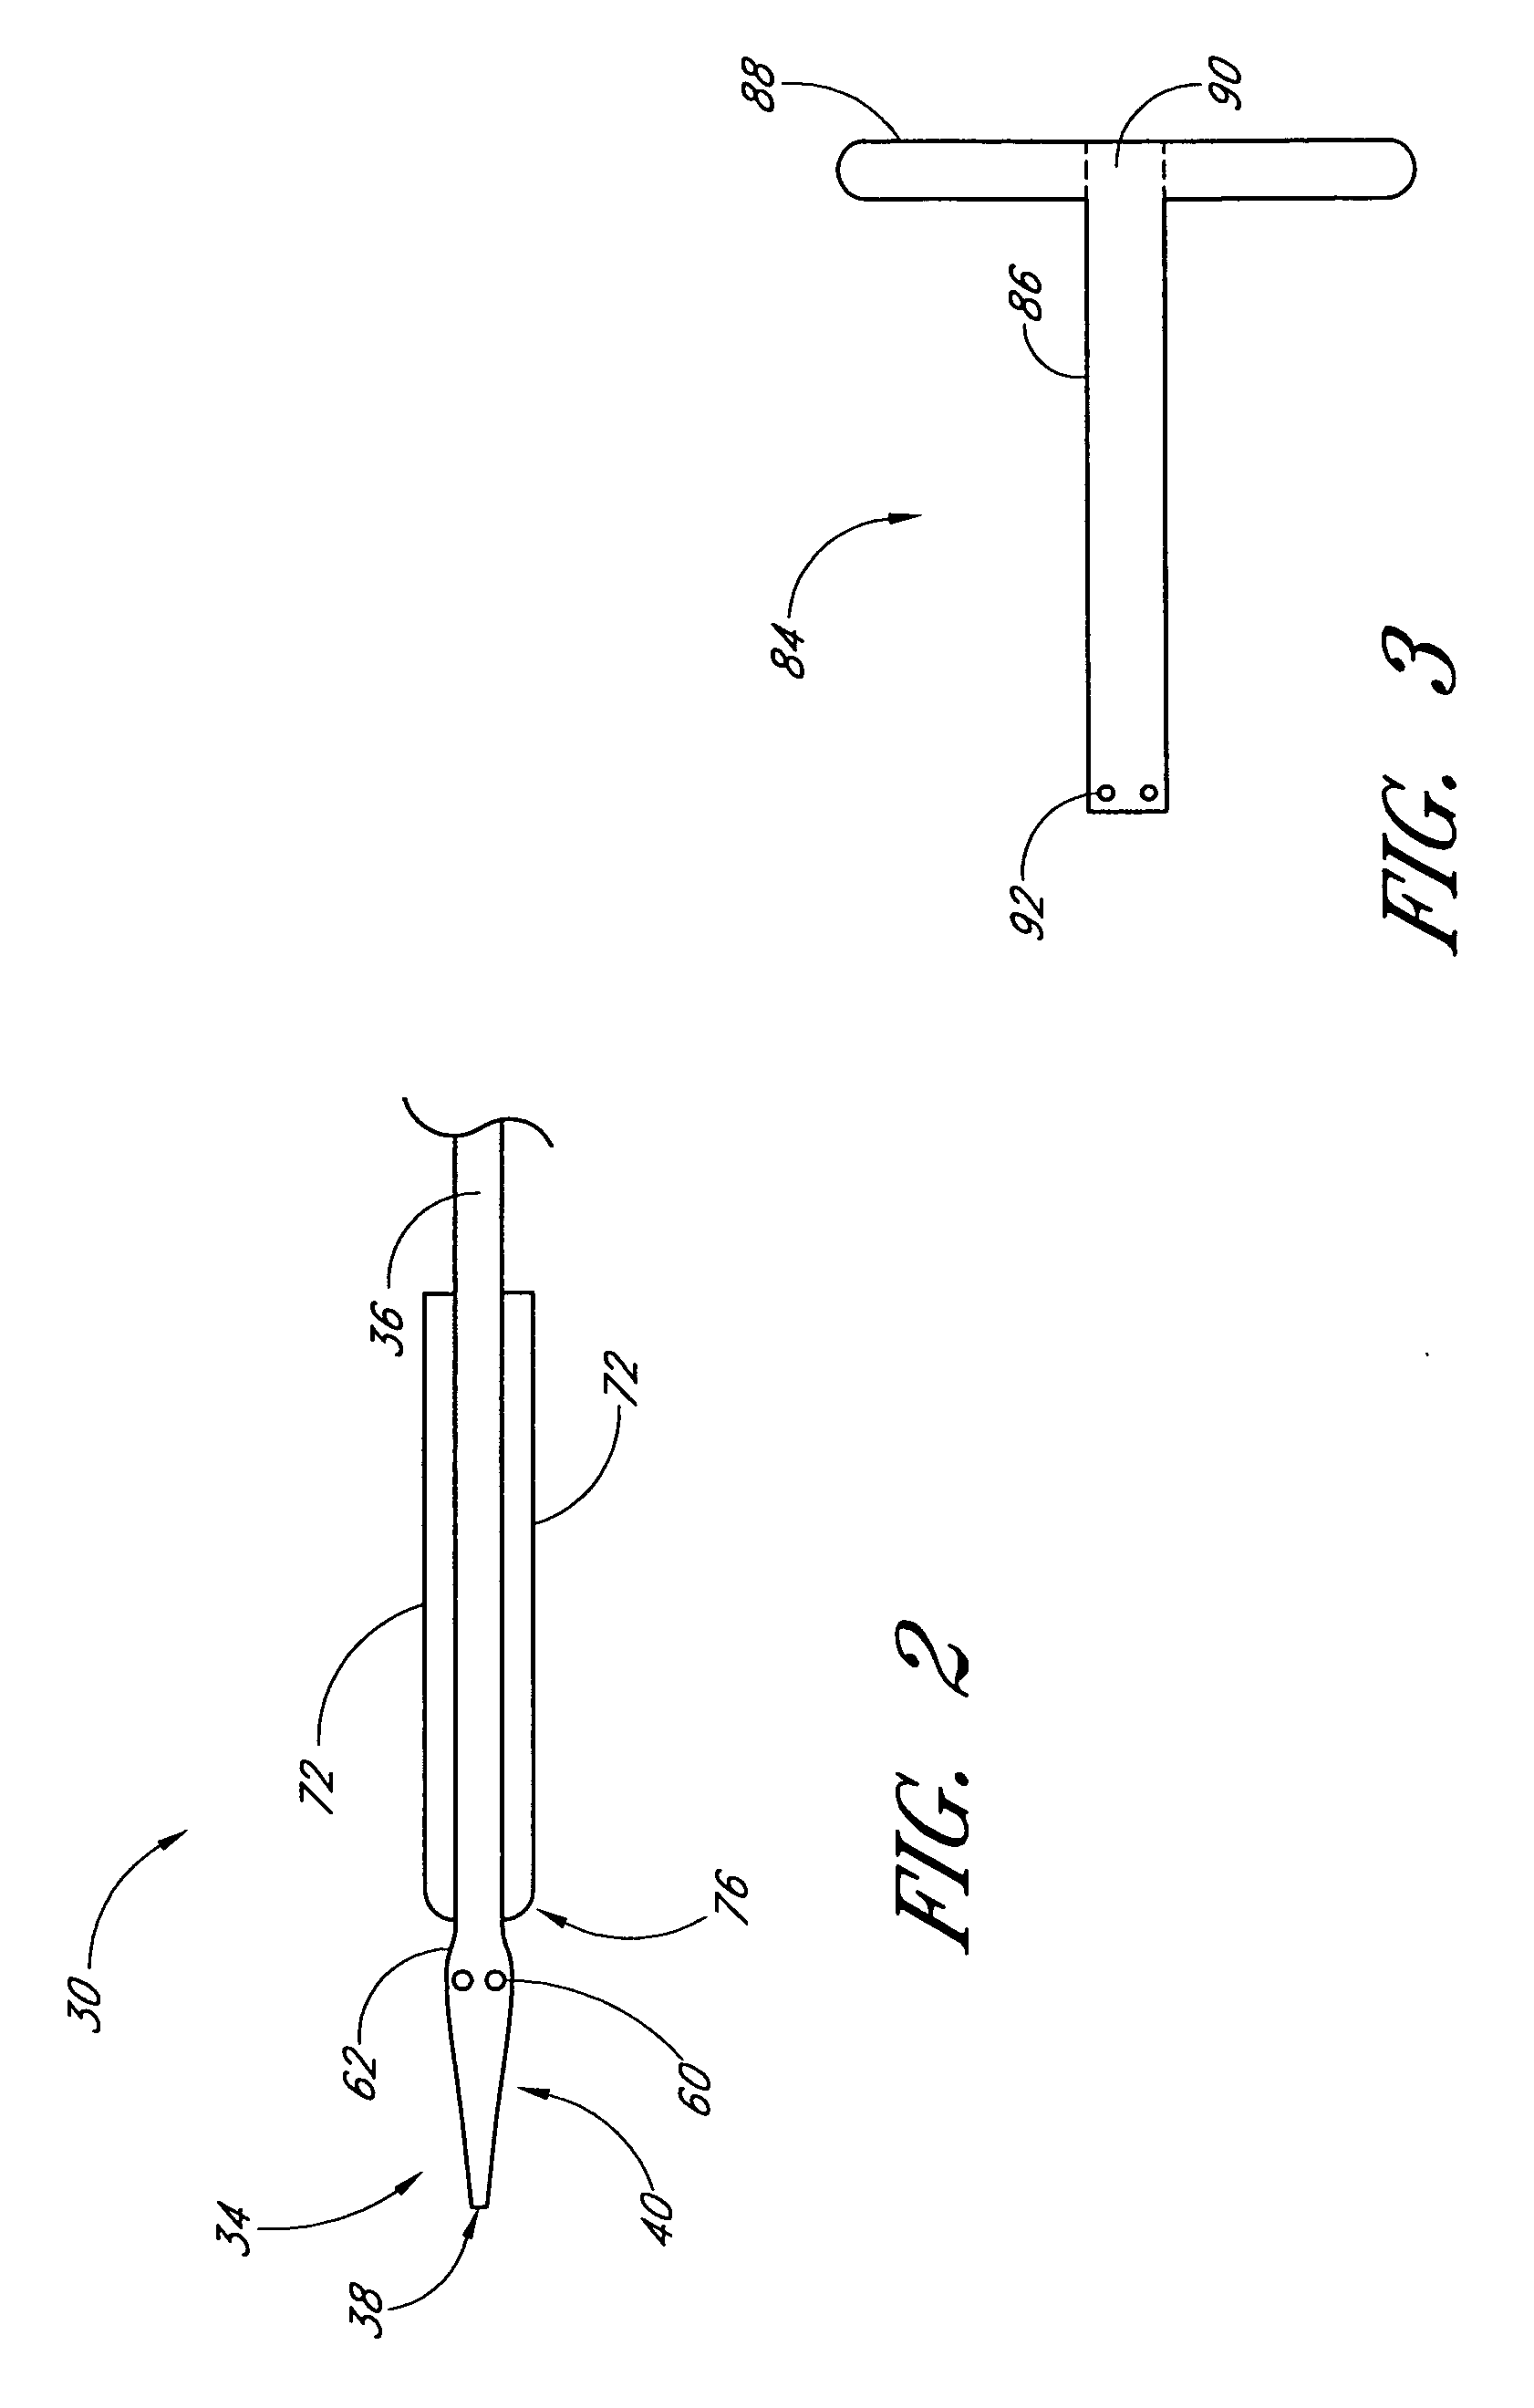 Vascular wound closure device and method